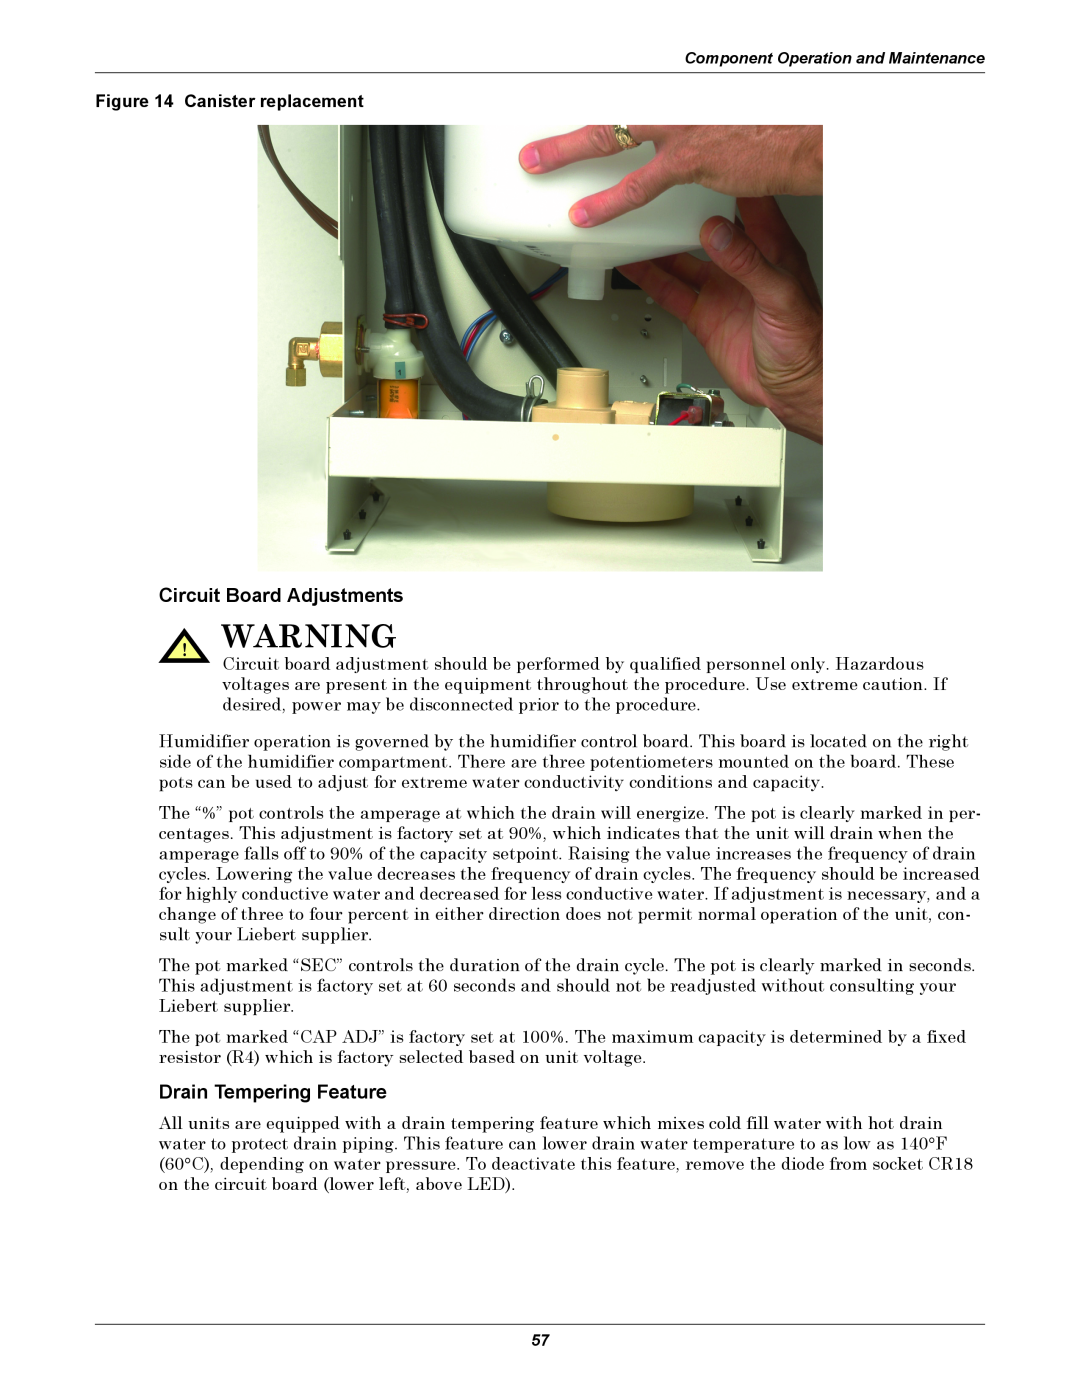 Liebert 3000 manual Circuit Board Adjustments, Drain Tempering Feature, Canister replacement 